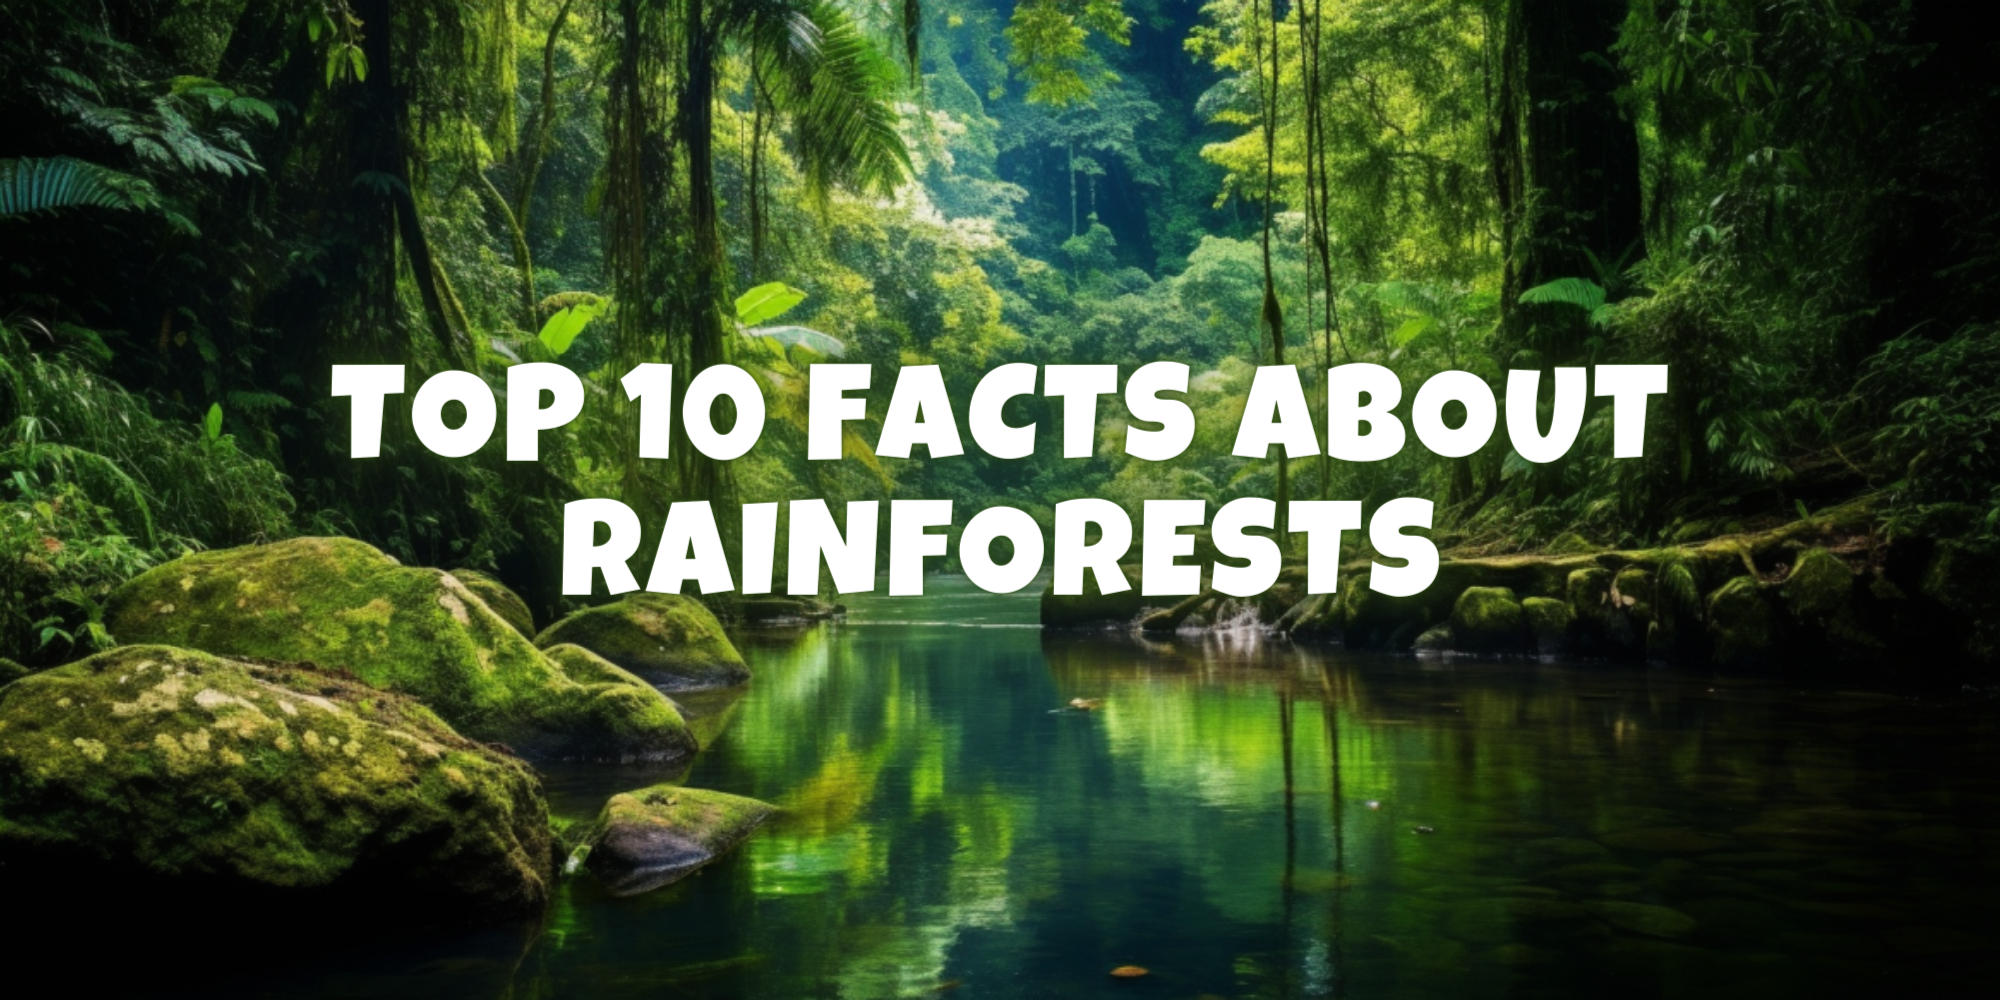 Rainforests: Top 10 Astonishing Facts You Must Know